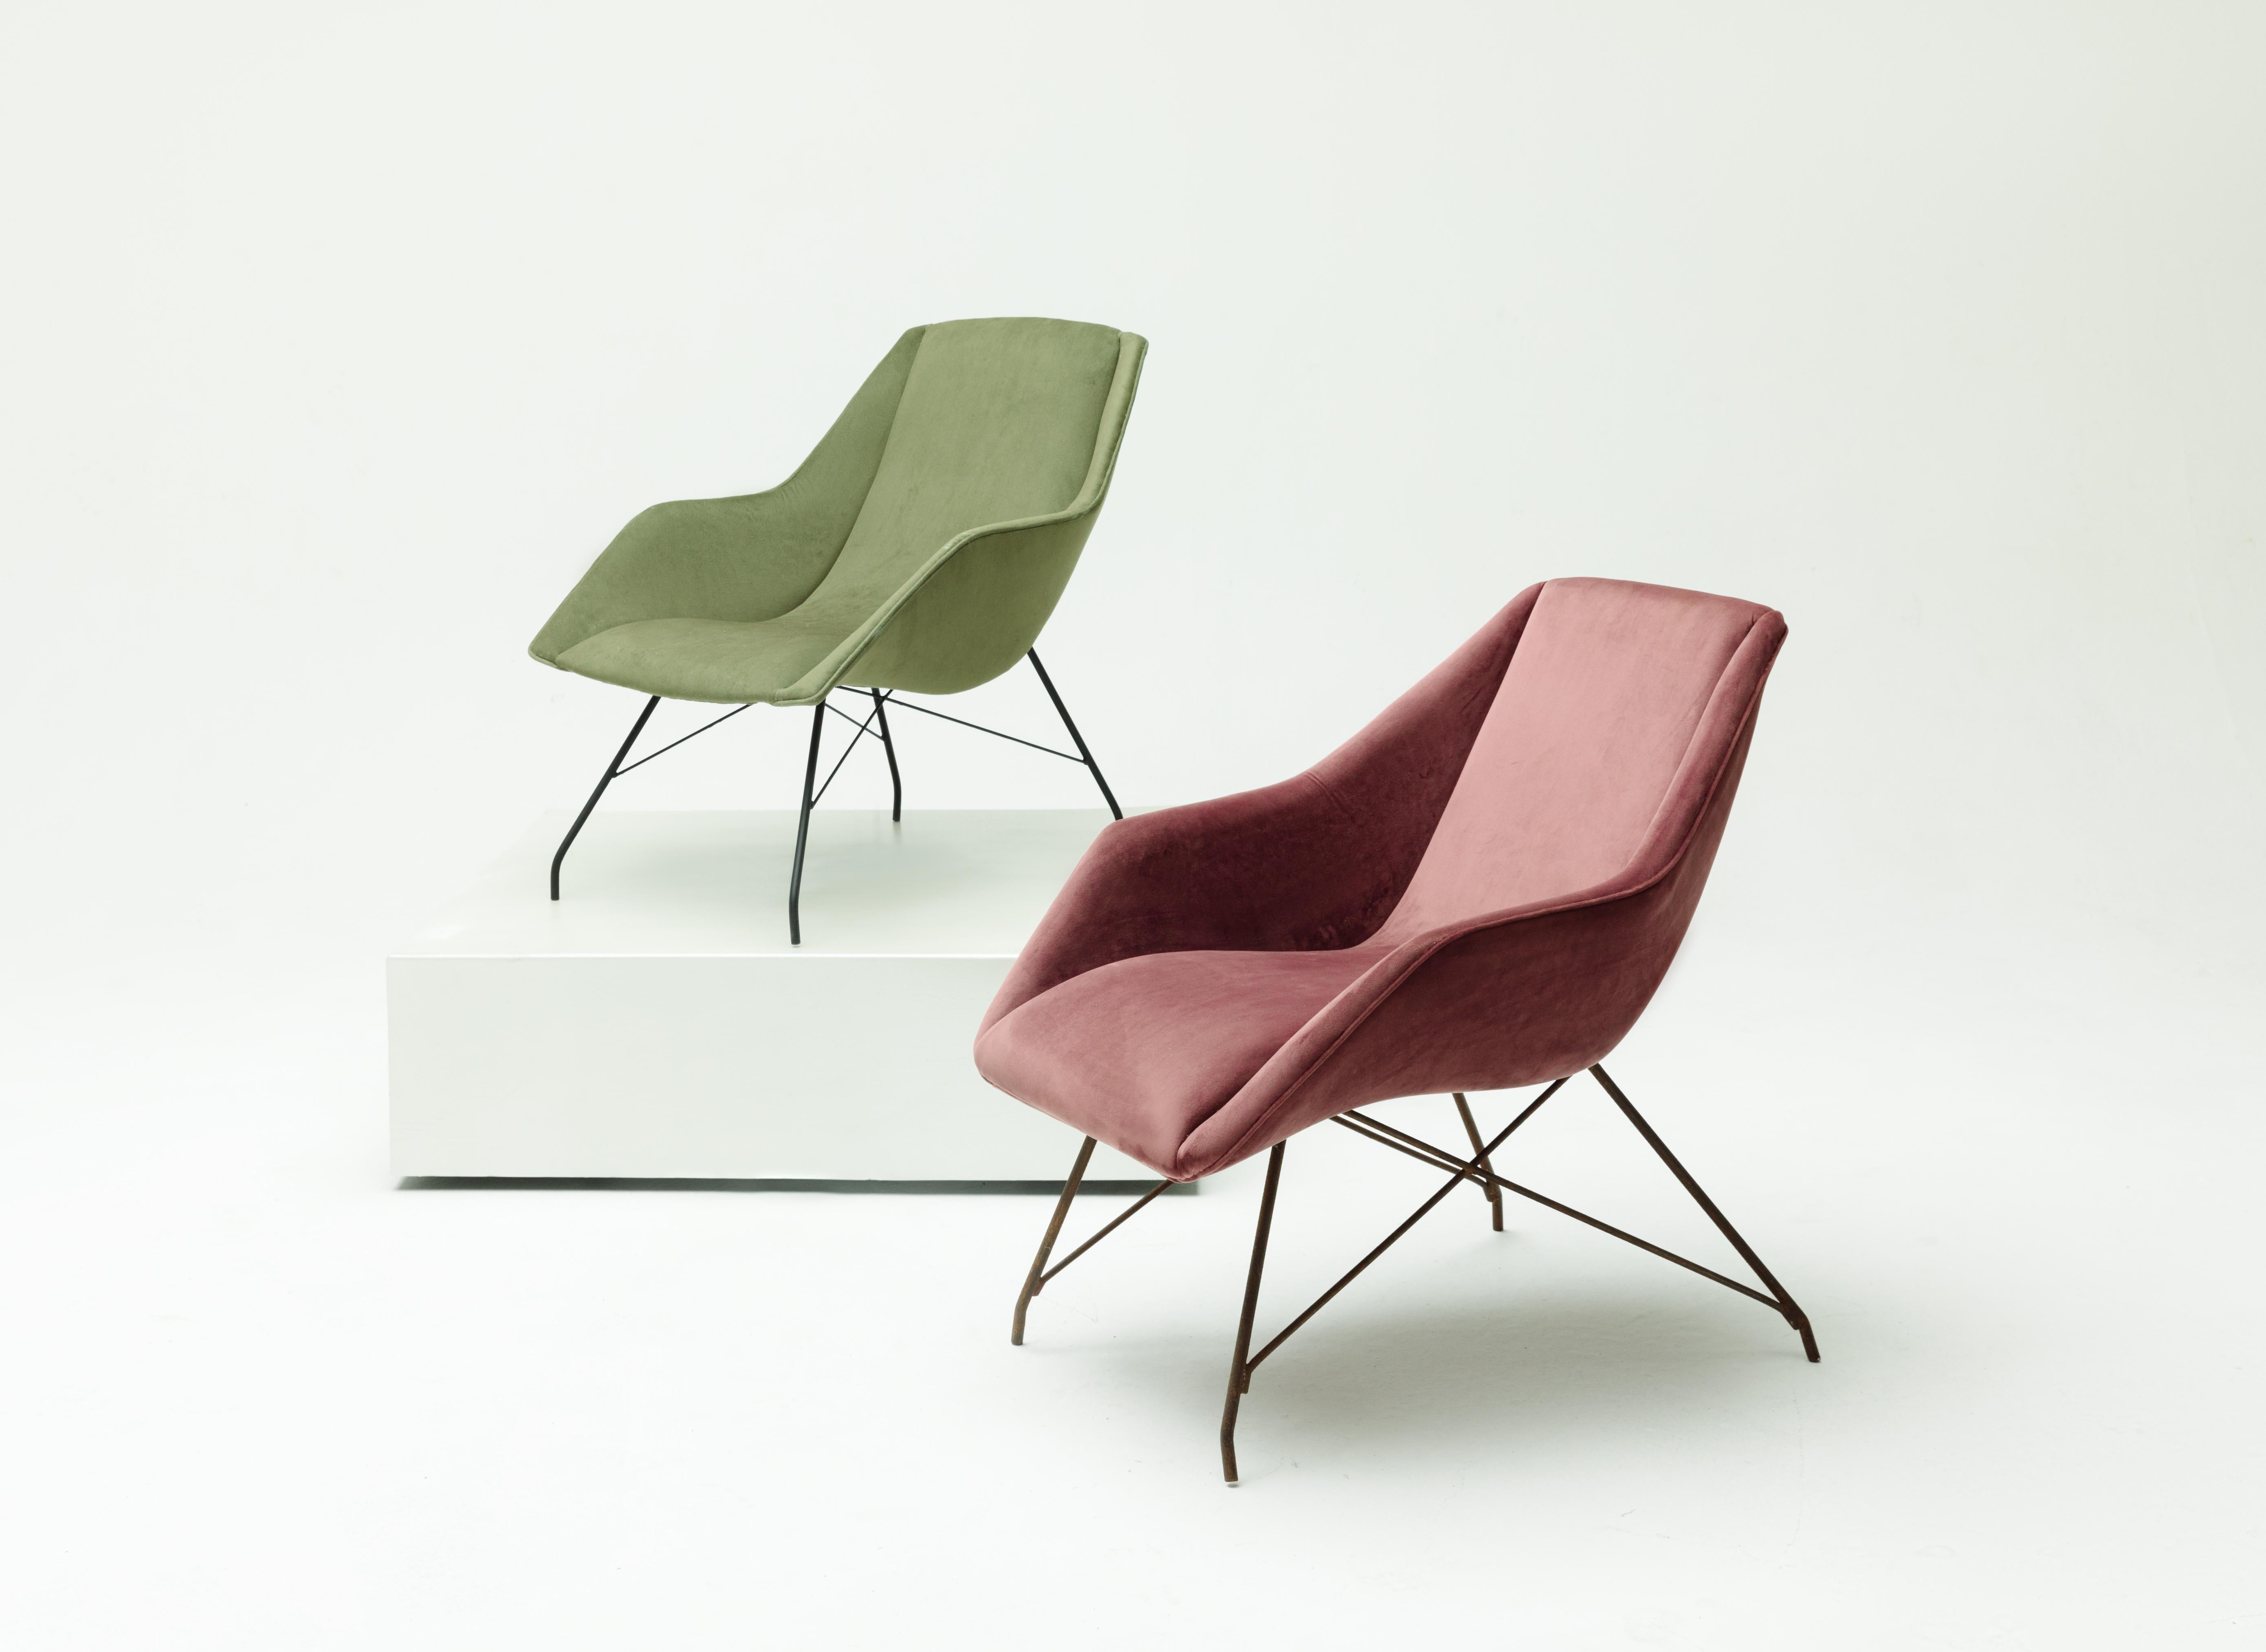 Concha armchair is one of the most iconic pieces designed by Martin Eisler (1913-1977). The armchair was created in 1953 and produced by Móveis Artesanal and then Forma S.A. Móveis e Objetos de Arte. “Galeria Artesanal,” the first showroom that